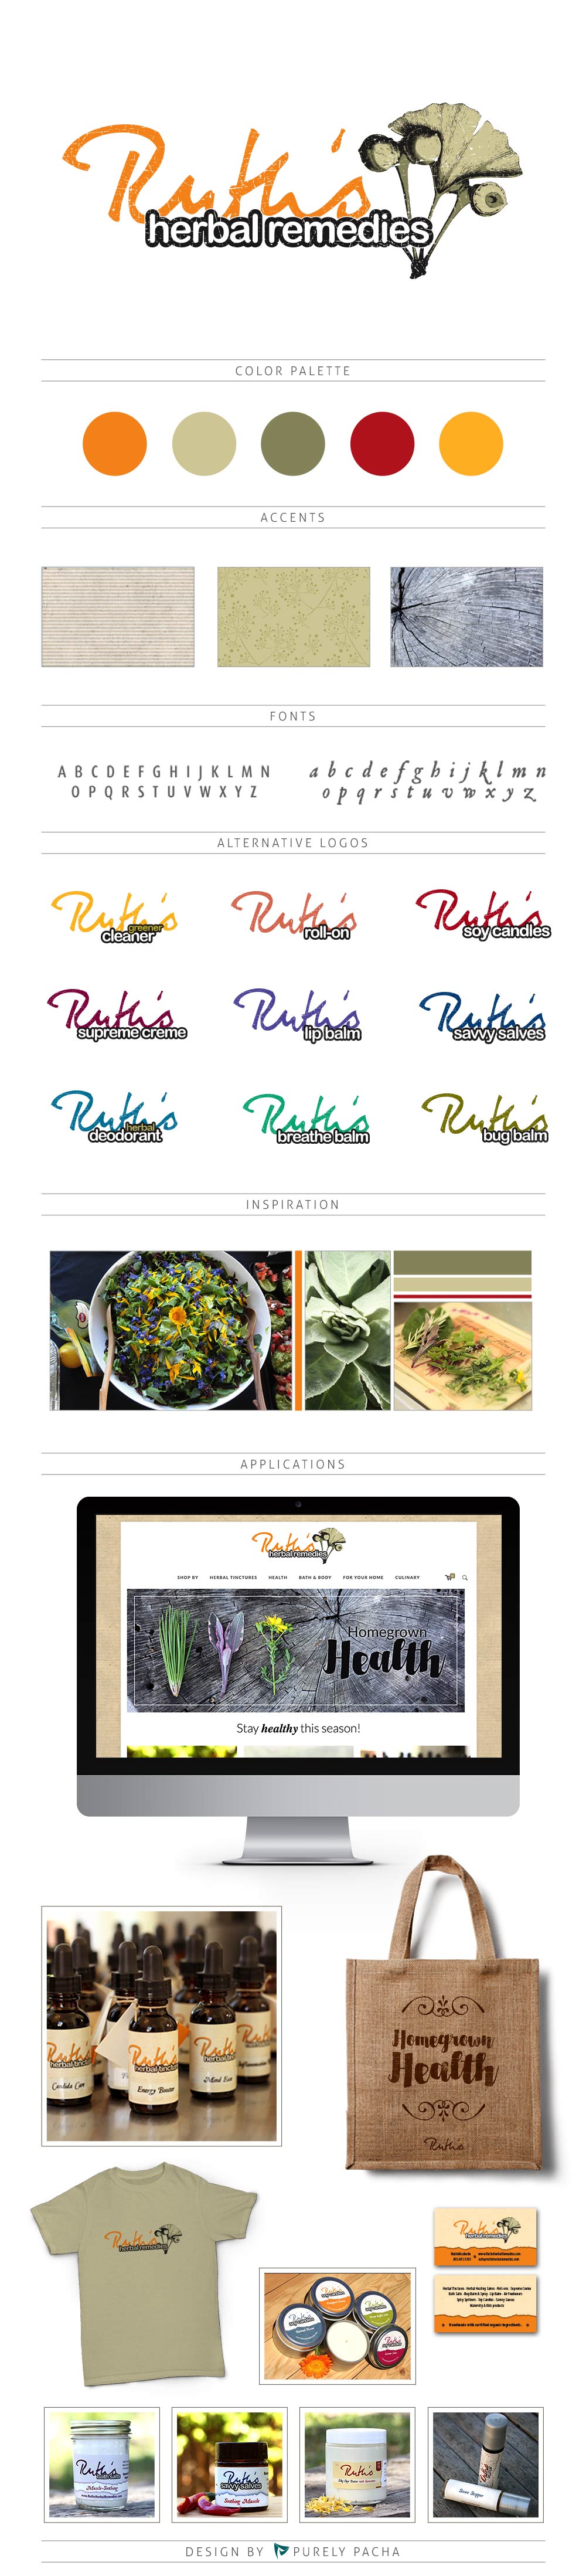 Ruth's Herbal Remedies - Logo and Identity Design